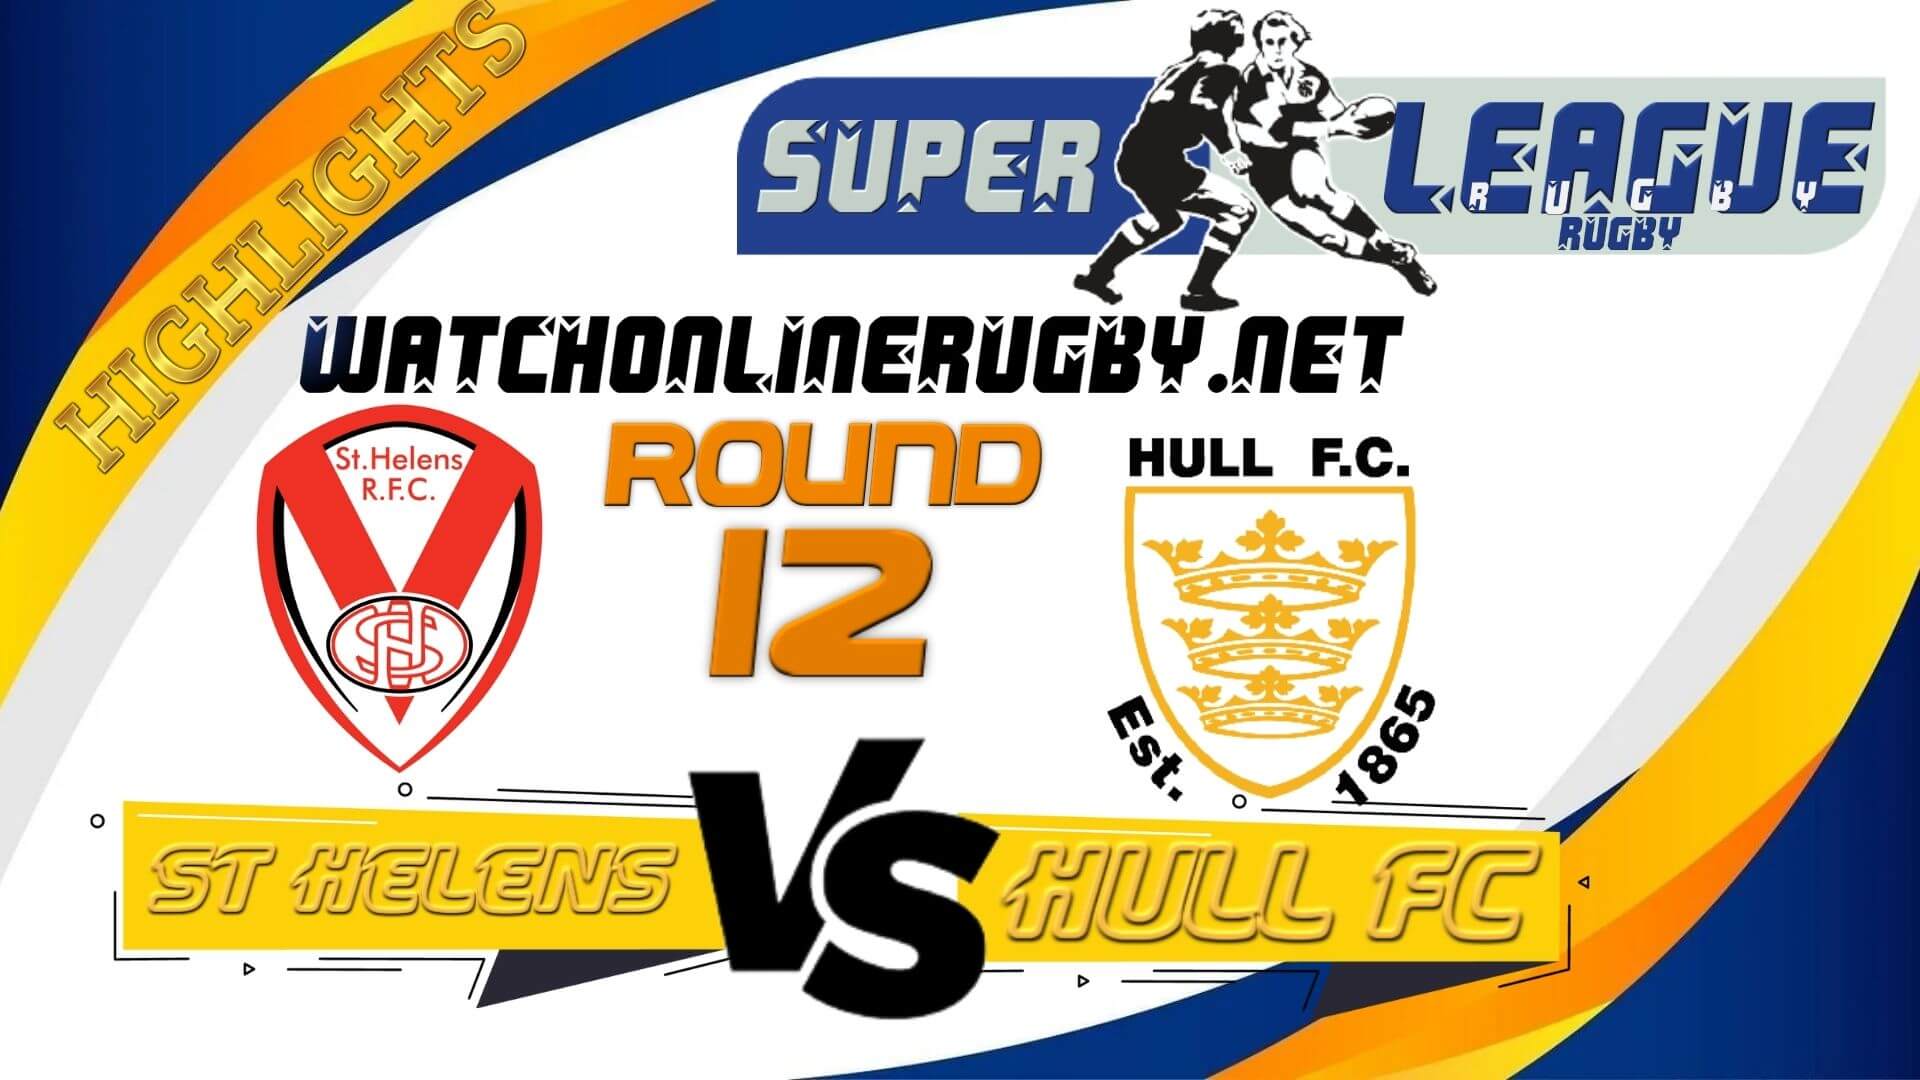 St Helens Vs Hull FC Super League Rugby 2022 RD 12